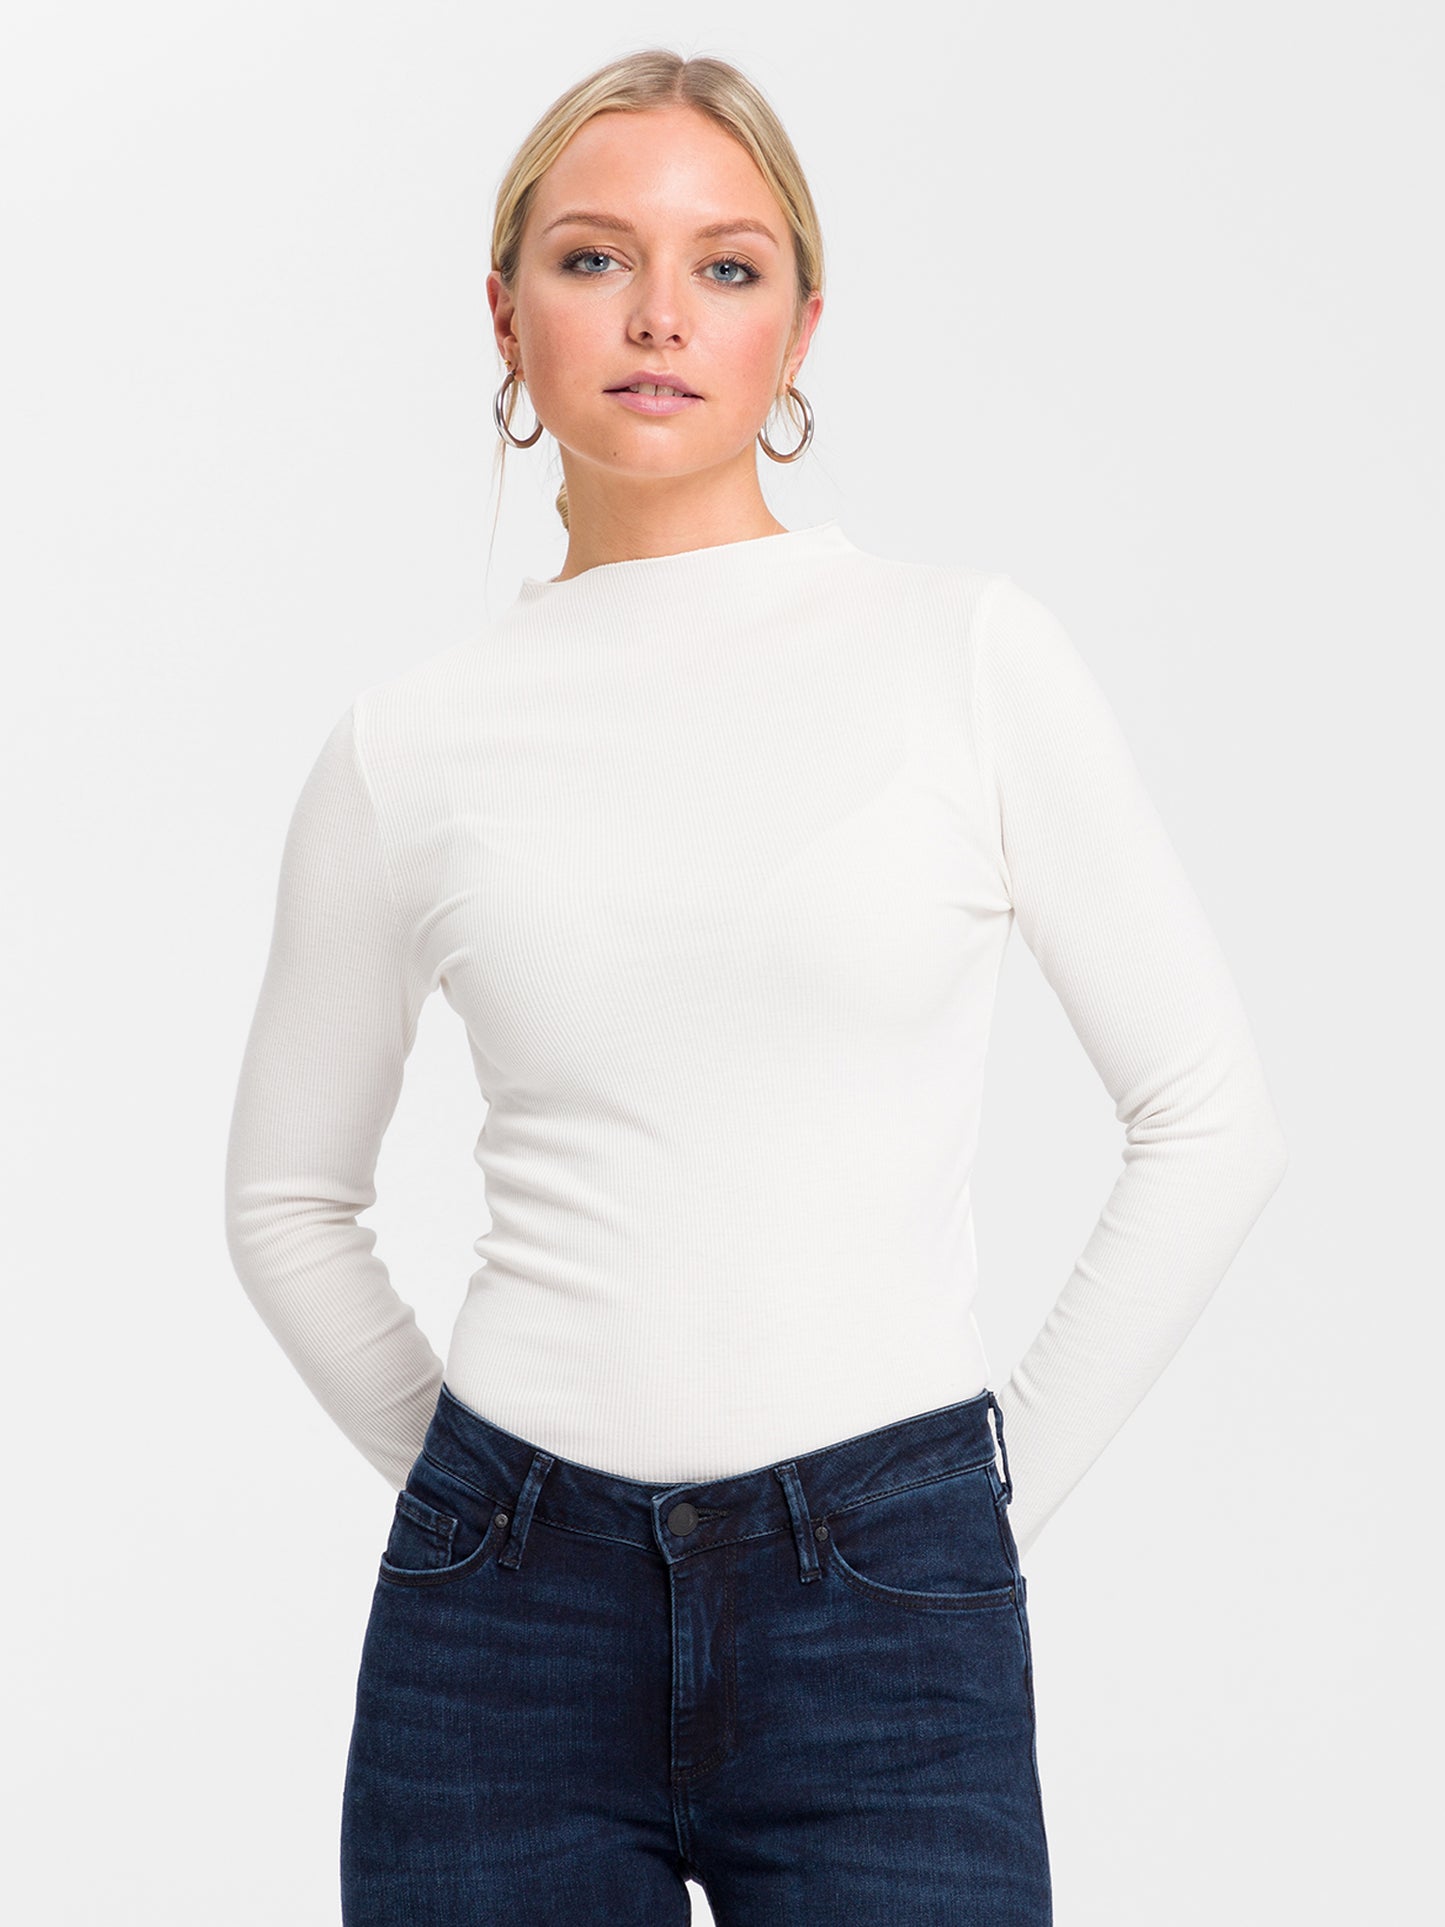 Women's slim long-sleeved shirt short with stand-up collar white